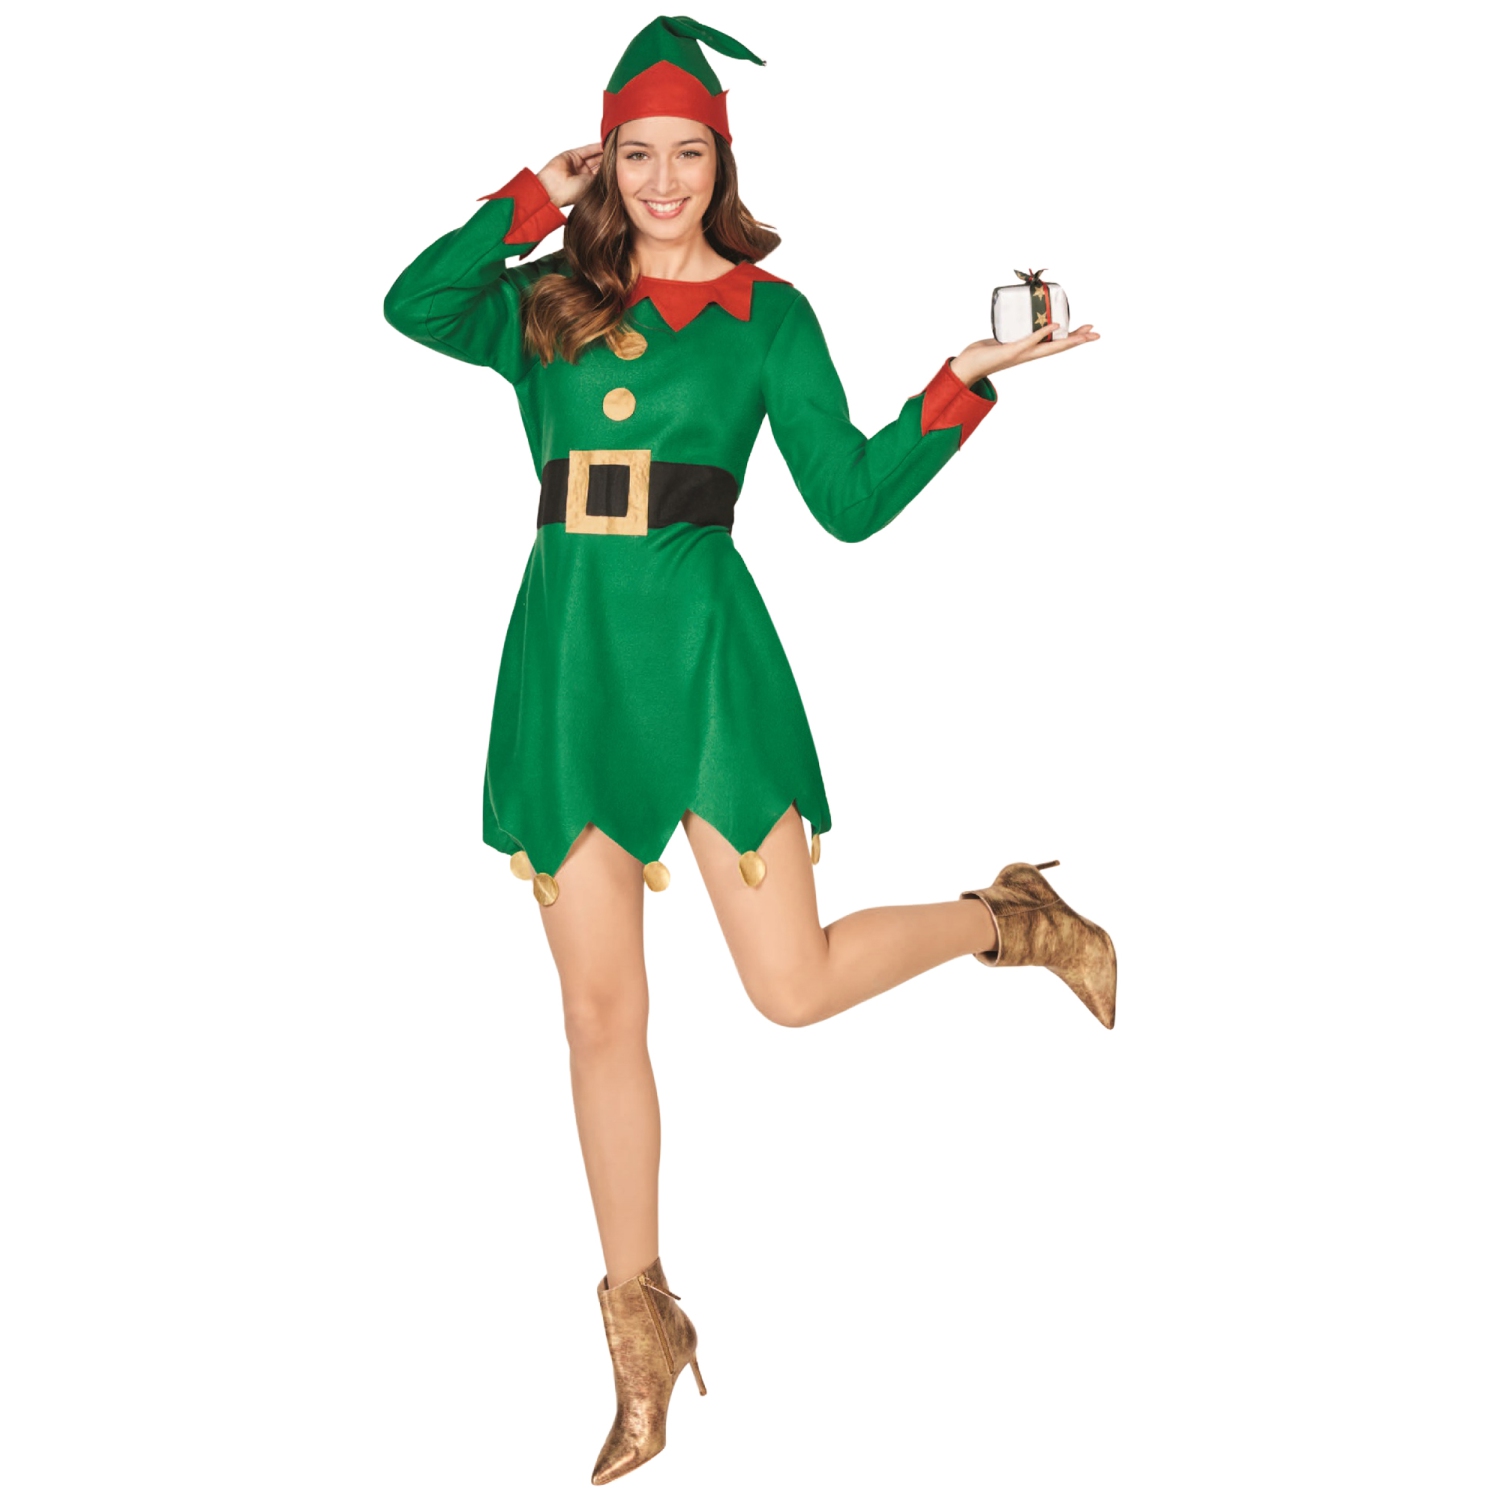 Red and Green Woman's Elf Christmas Costume - Large